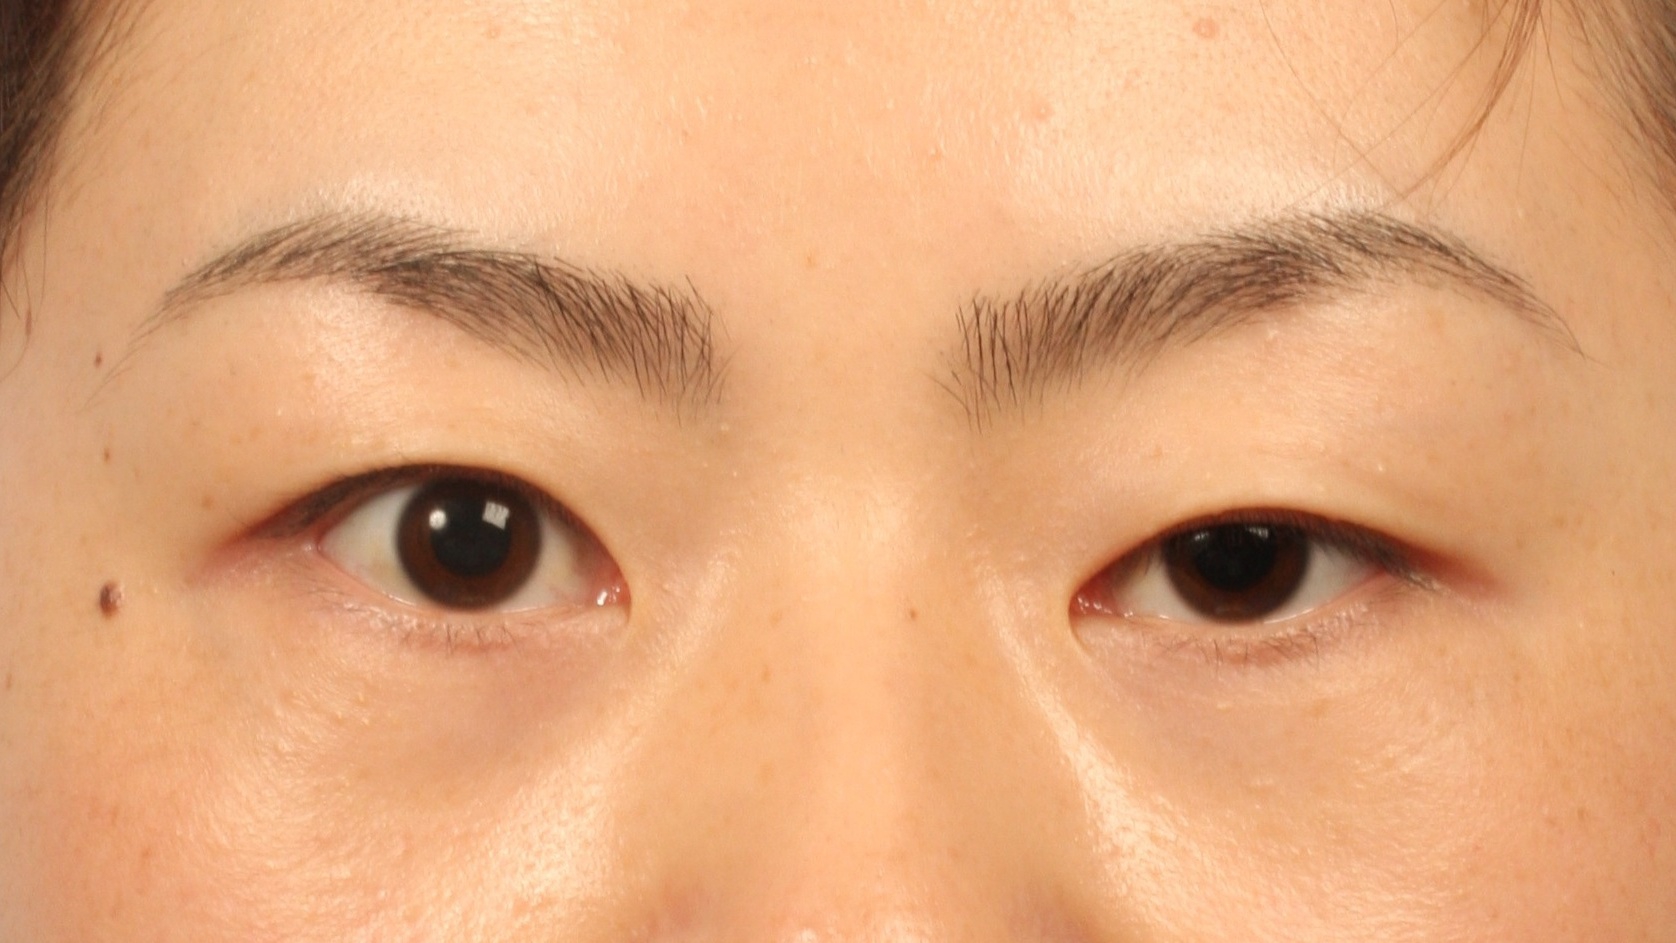 What are the potential causes and risks of unsuccessful double eyelid surgery?